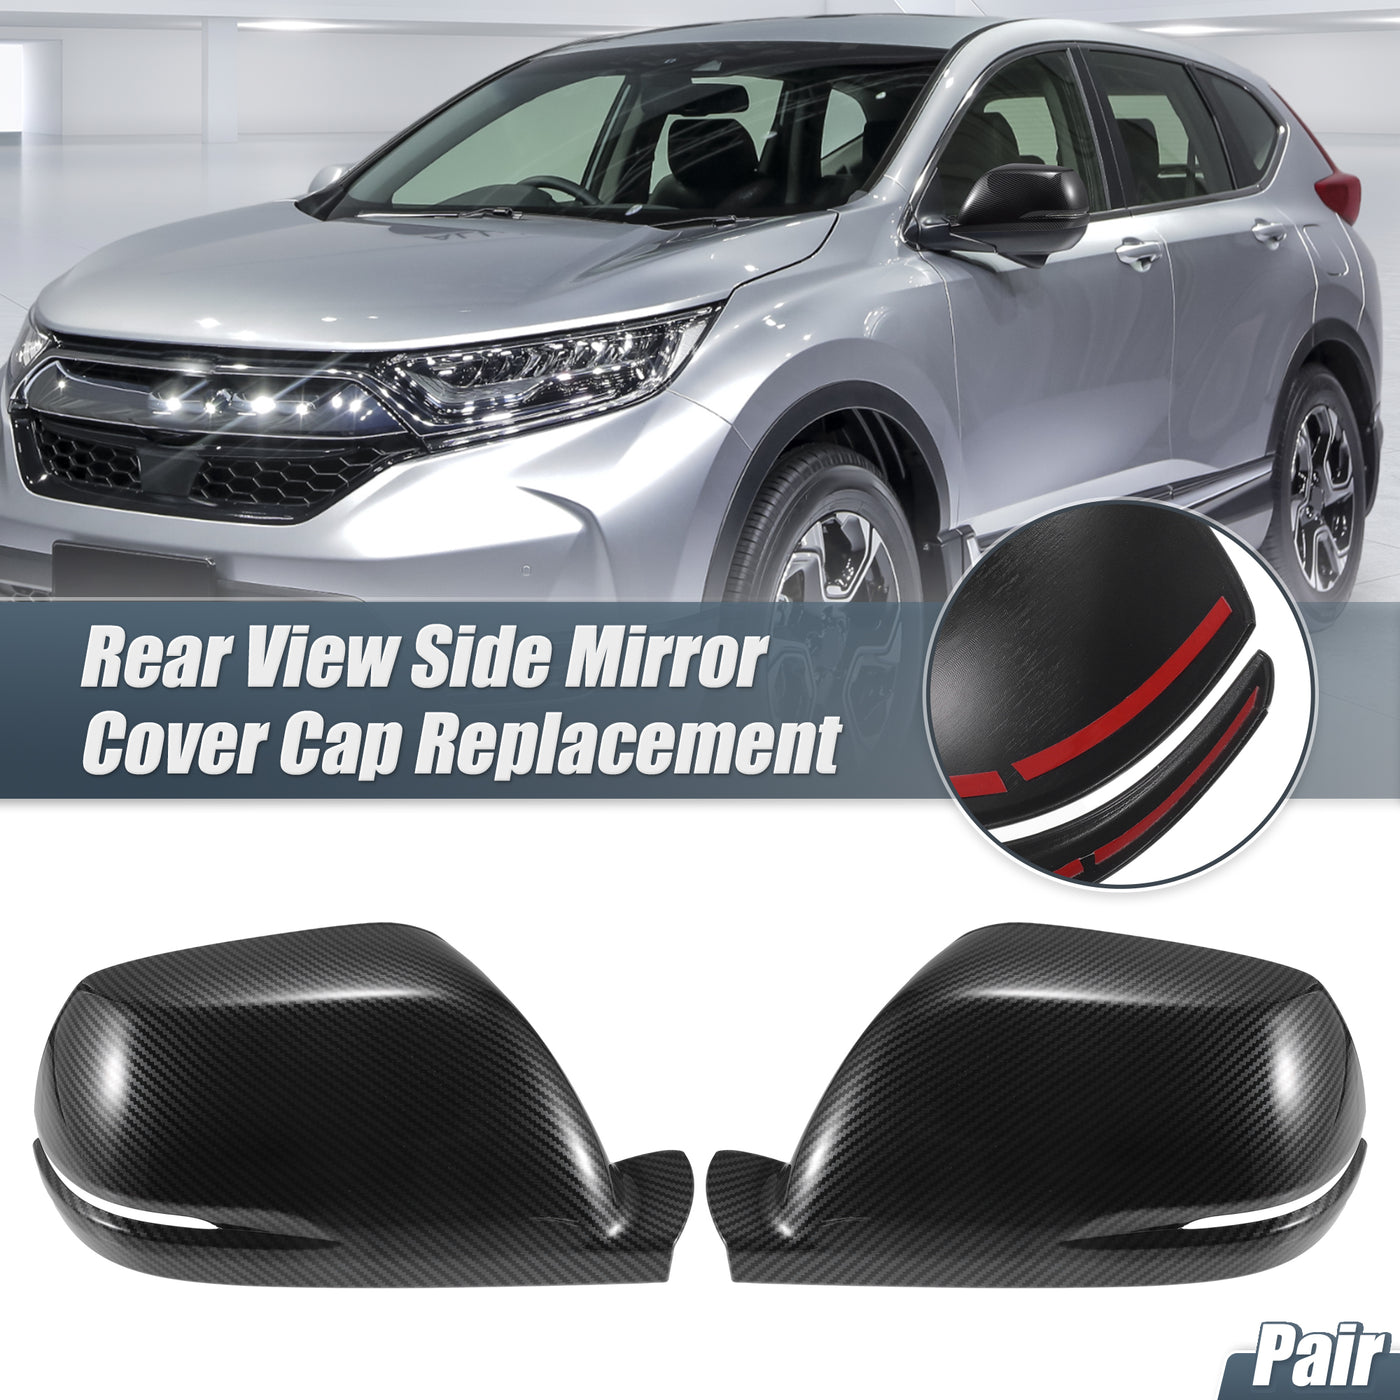 X AUTOHAUX 1 Pair Car Rear View Driver Passenger Side Mirror Cover Cap Overlay Black Carbon Fiber Pattern for Honda CRV CR-V 2017 2018 2019 for Models with Turn Signal Light